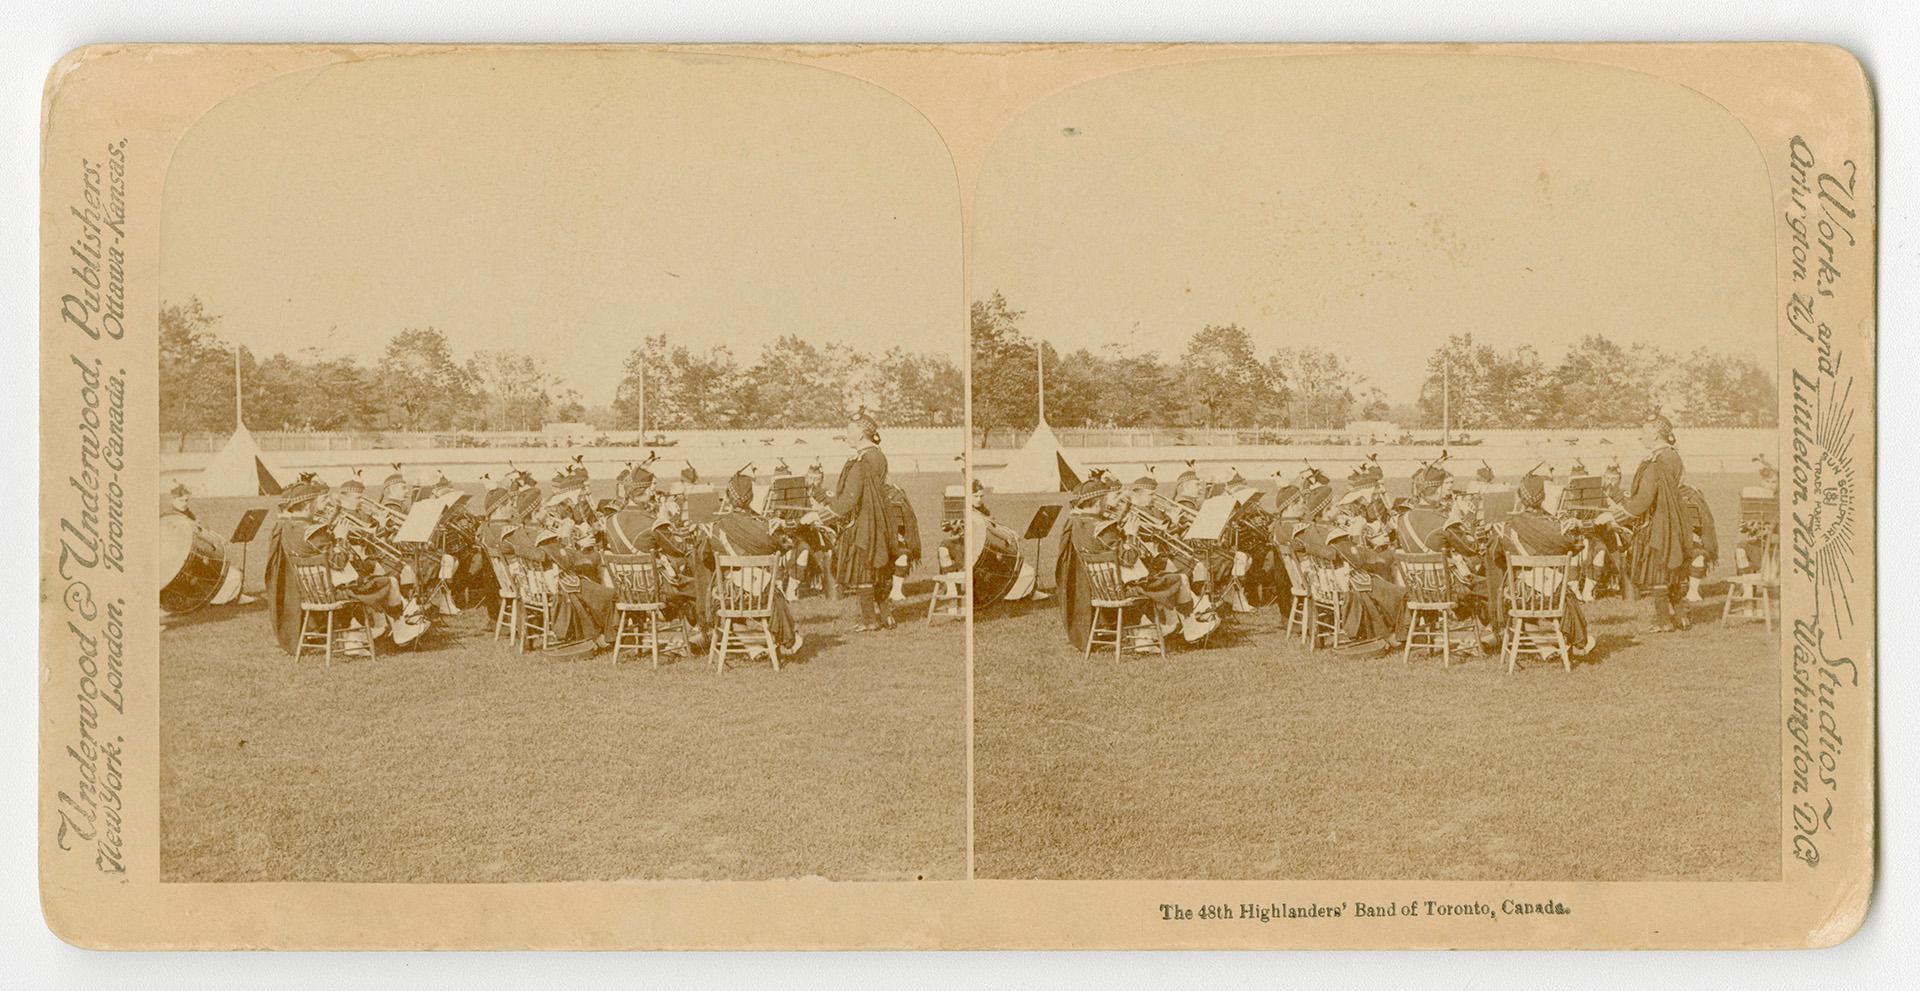 Pictures show members of a pipe and drum band sitting on chairs with their instruments in an ou ...